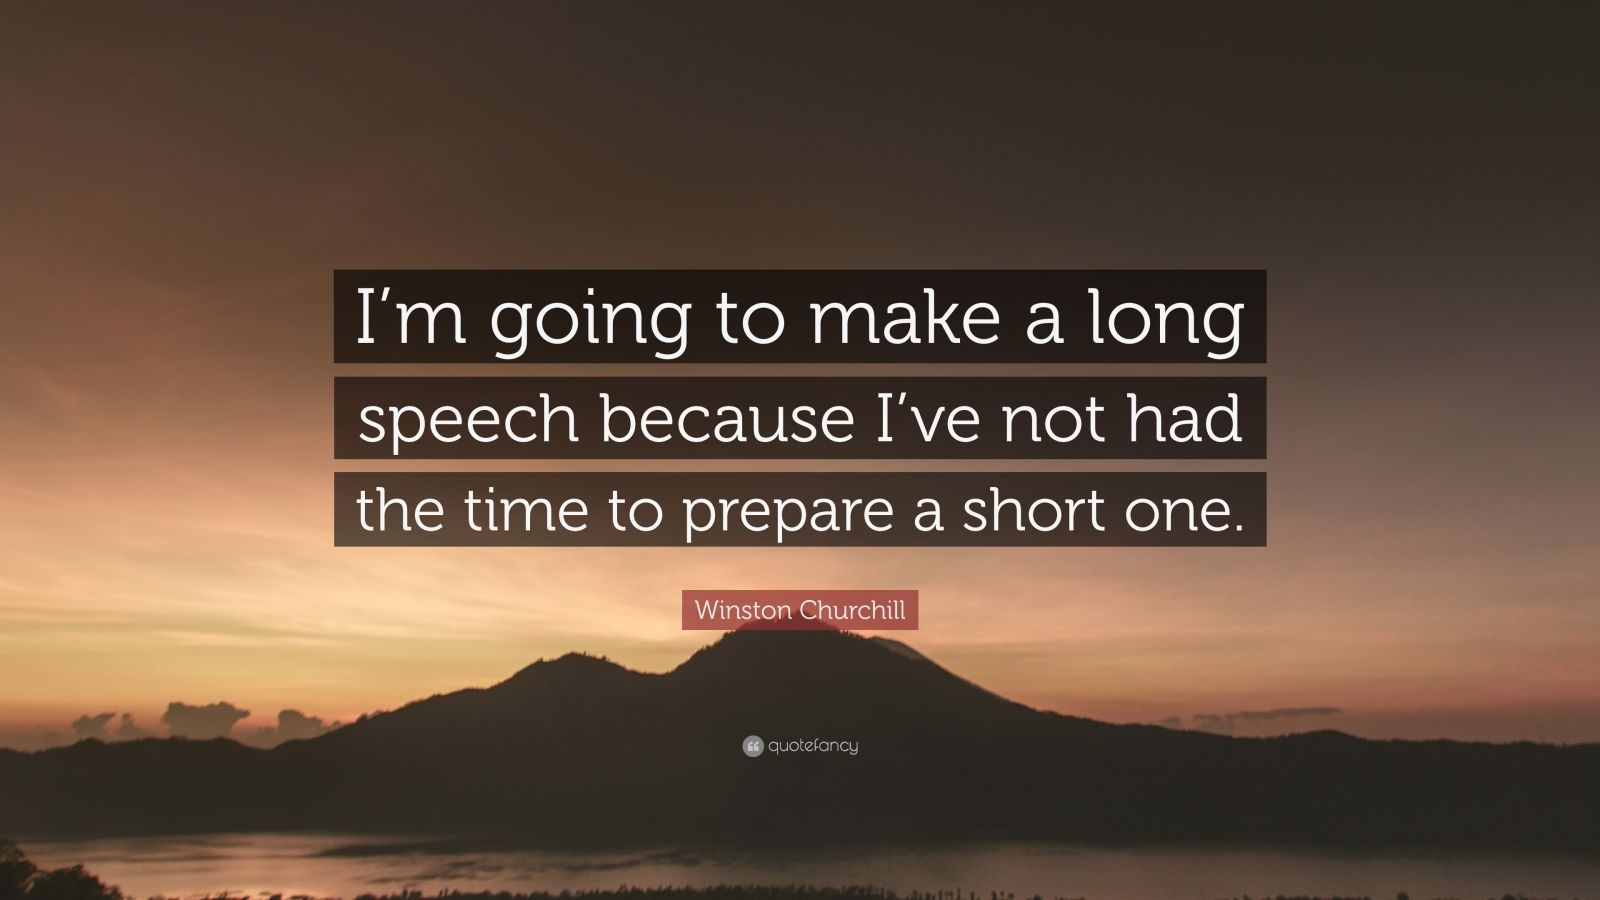 Winston Churchill Quote: “I’m going to make a long speech because I’ve